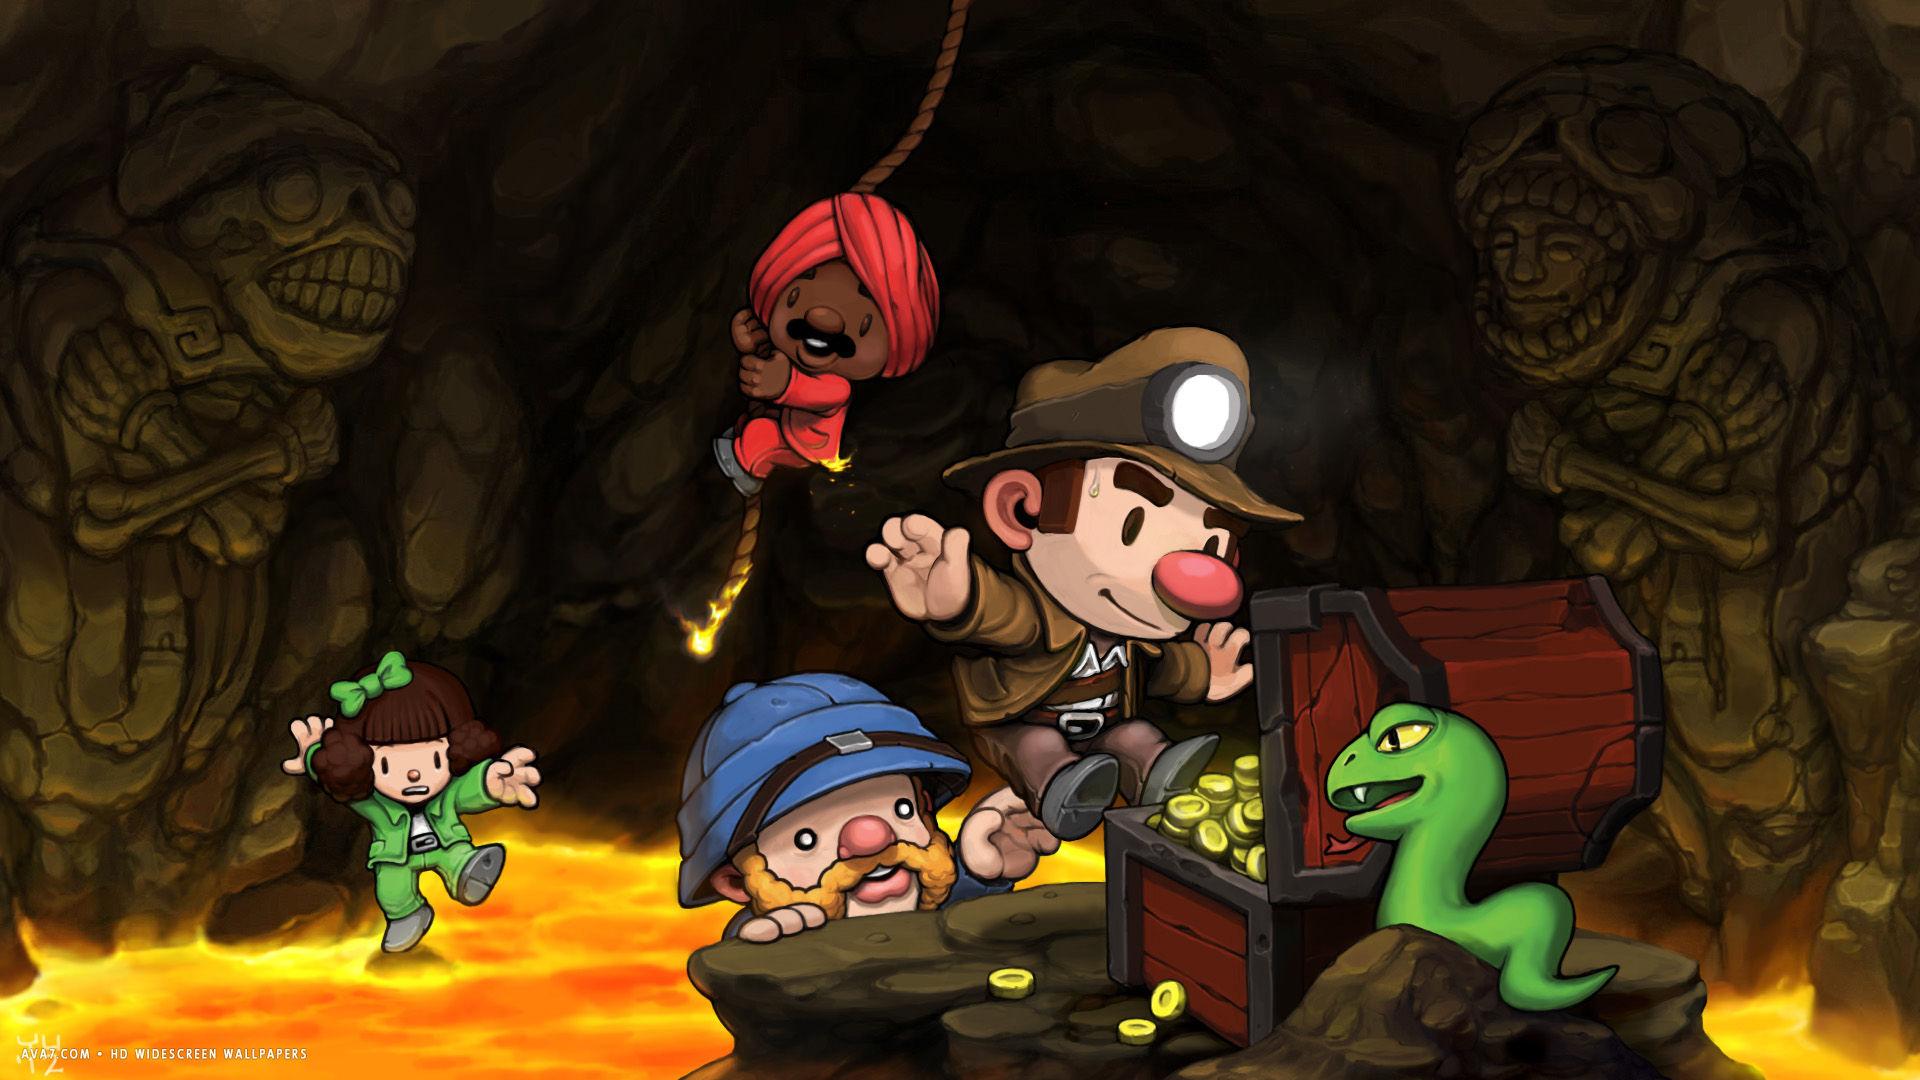 spelunky game HD widescreen wallpaper / games background